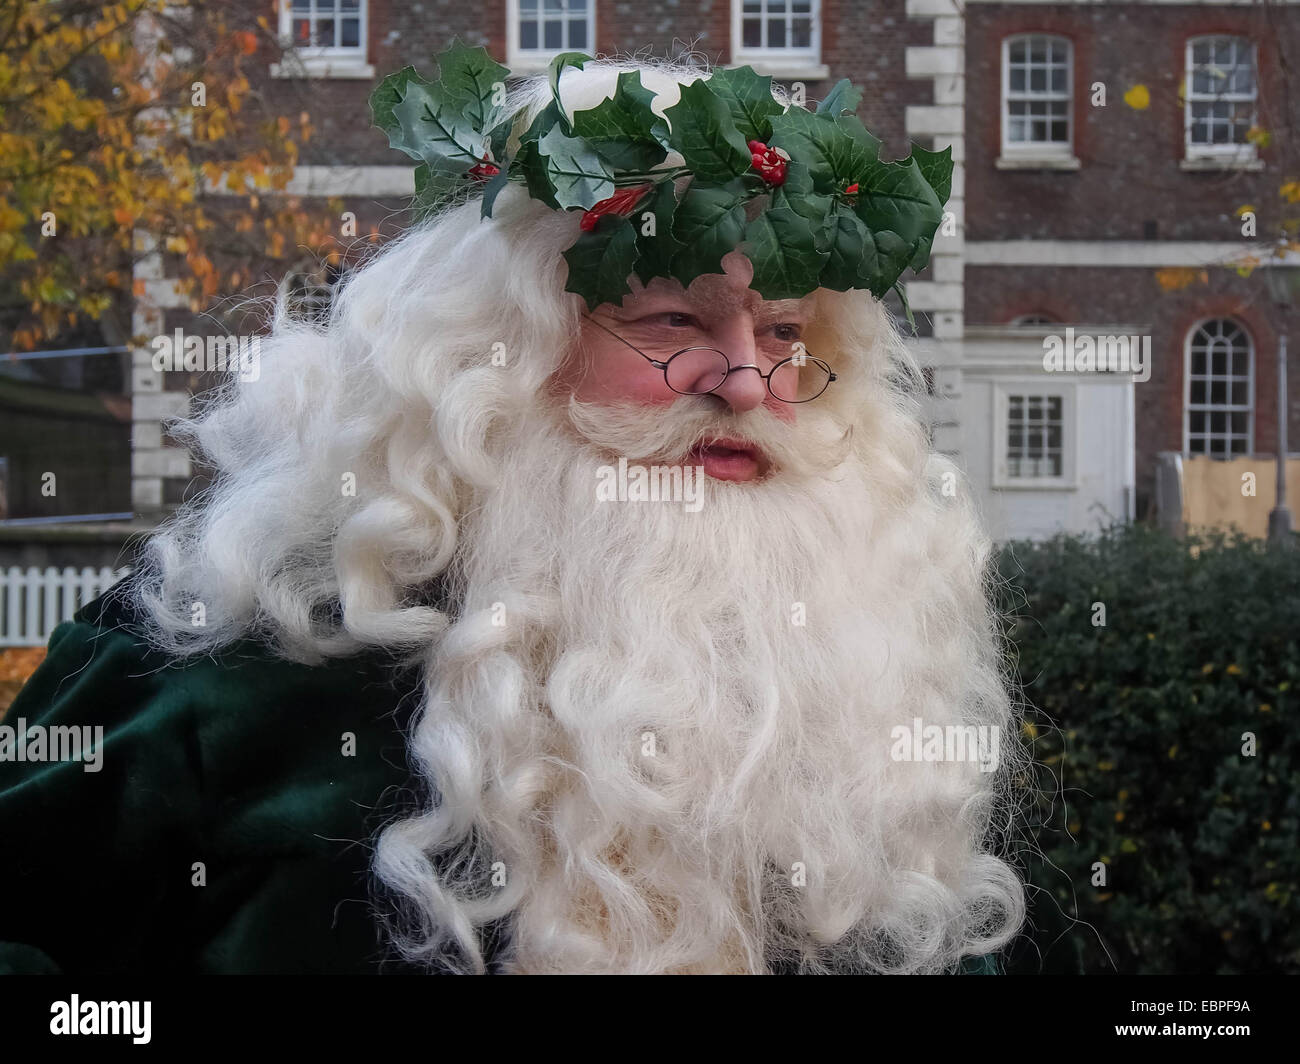 A traditional Victorian Father Christmas, Santa Clause, in his original Green costume. Stock Photo